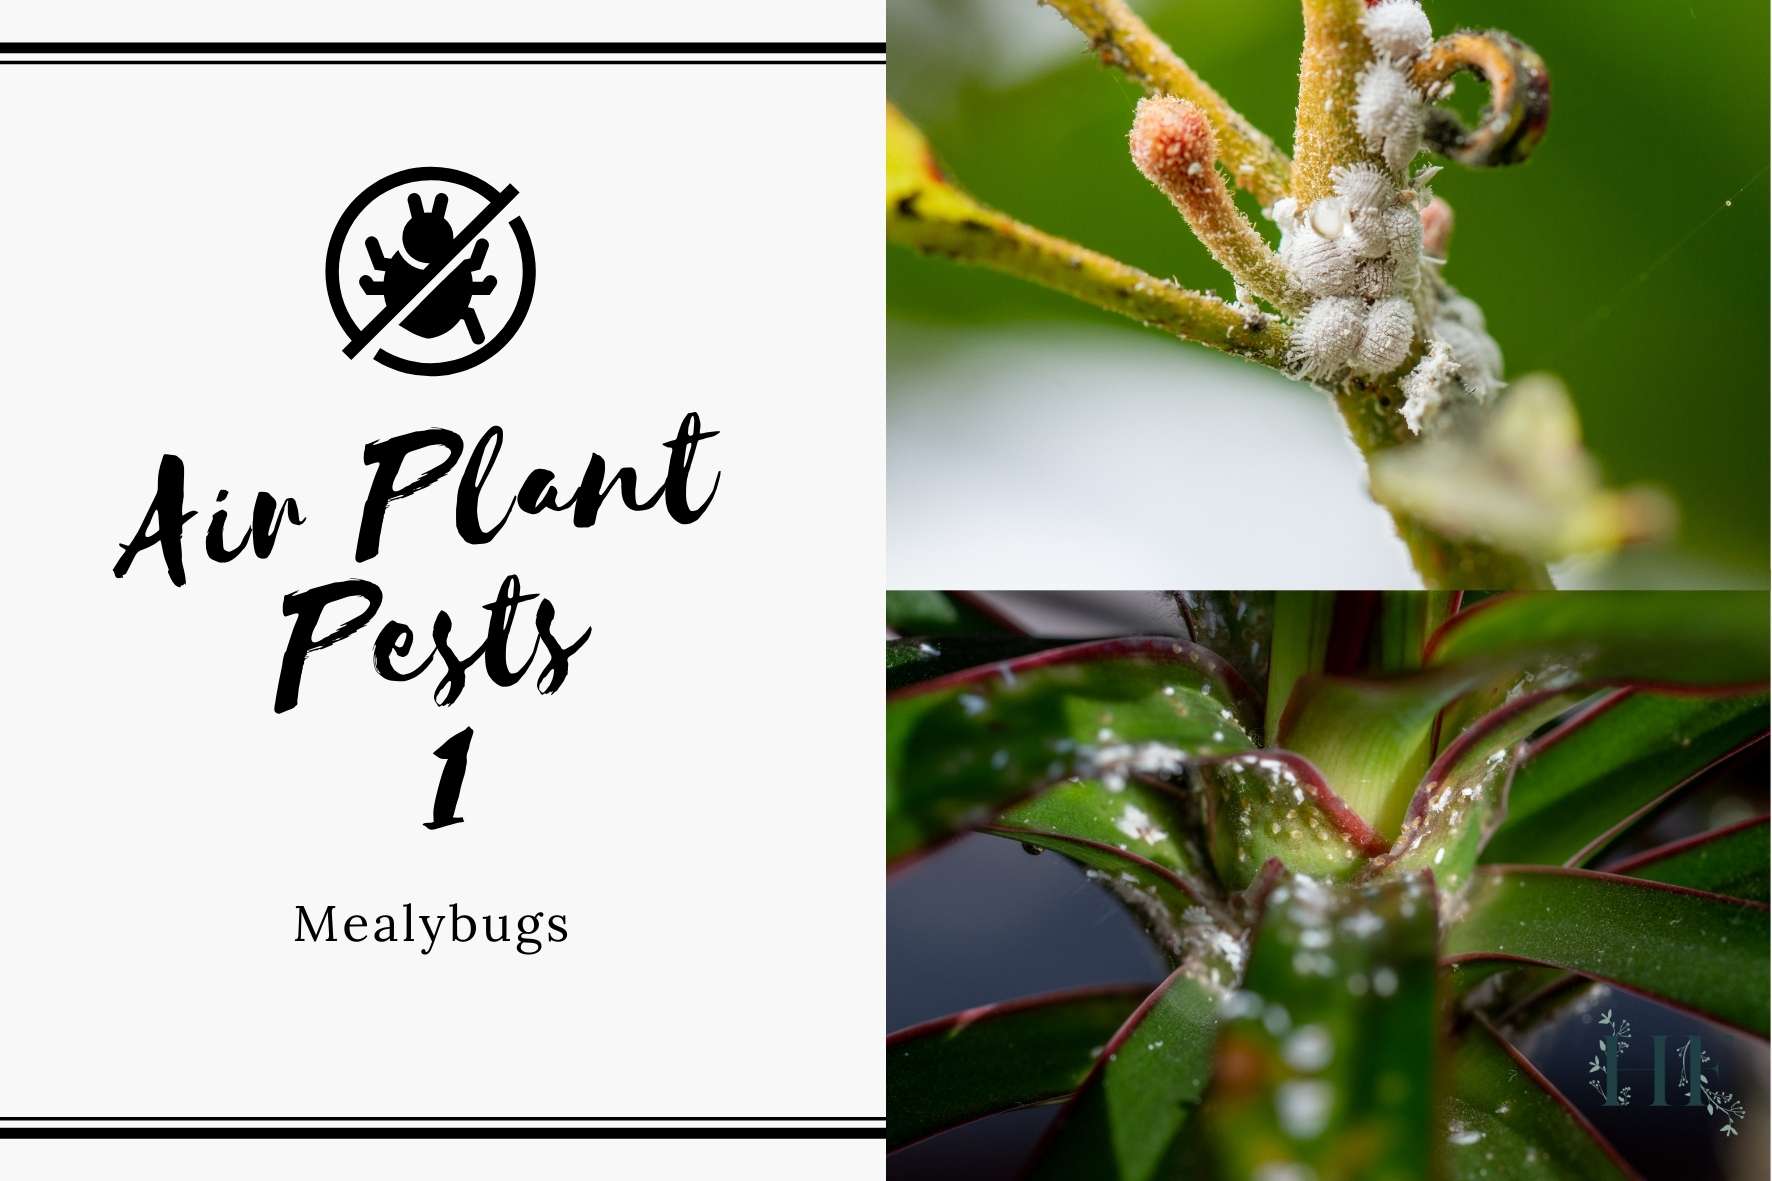 air-plant-pests-1-mealybugs